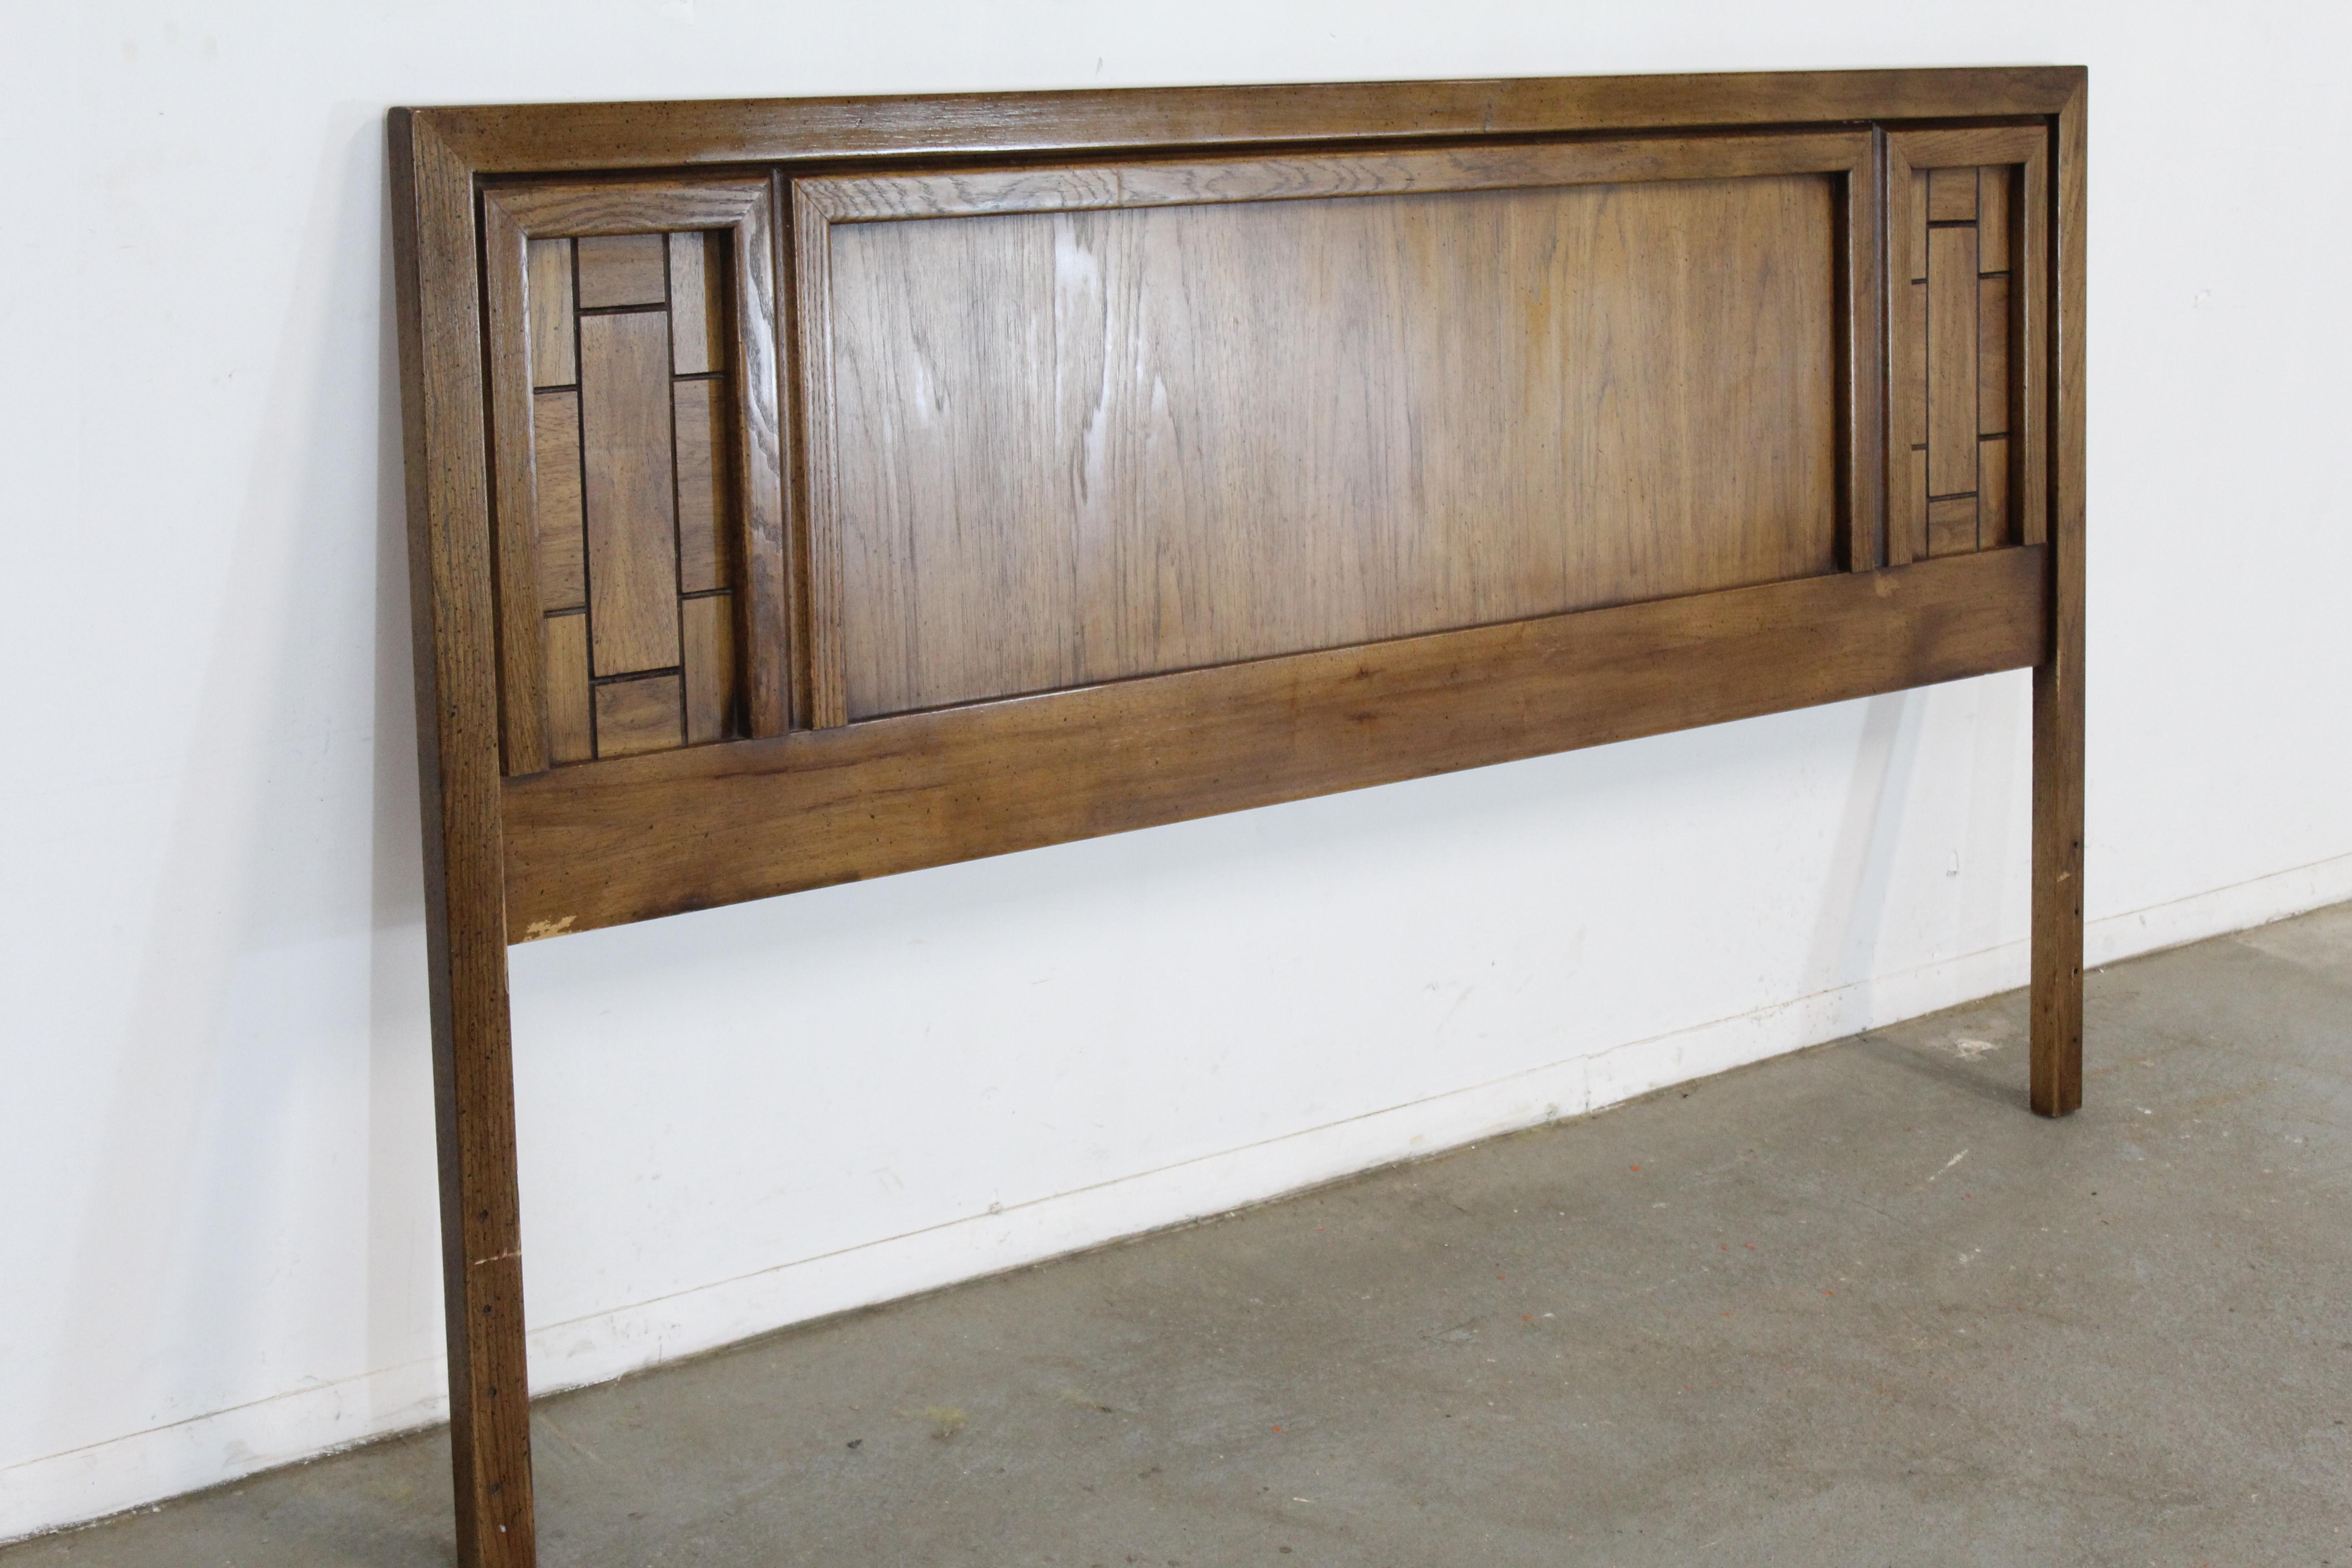 Mid-Century Danish Modern walnut full size headboard

Offered is a vintage Mid-Century Modern Walnut Sculpted King Size Bed/Headboard. Looks to be walnut color. It is in very good, structurally sound condition with minor age wear, edge wear, and